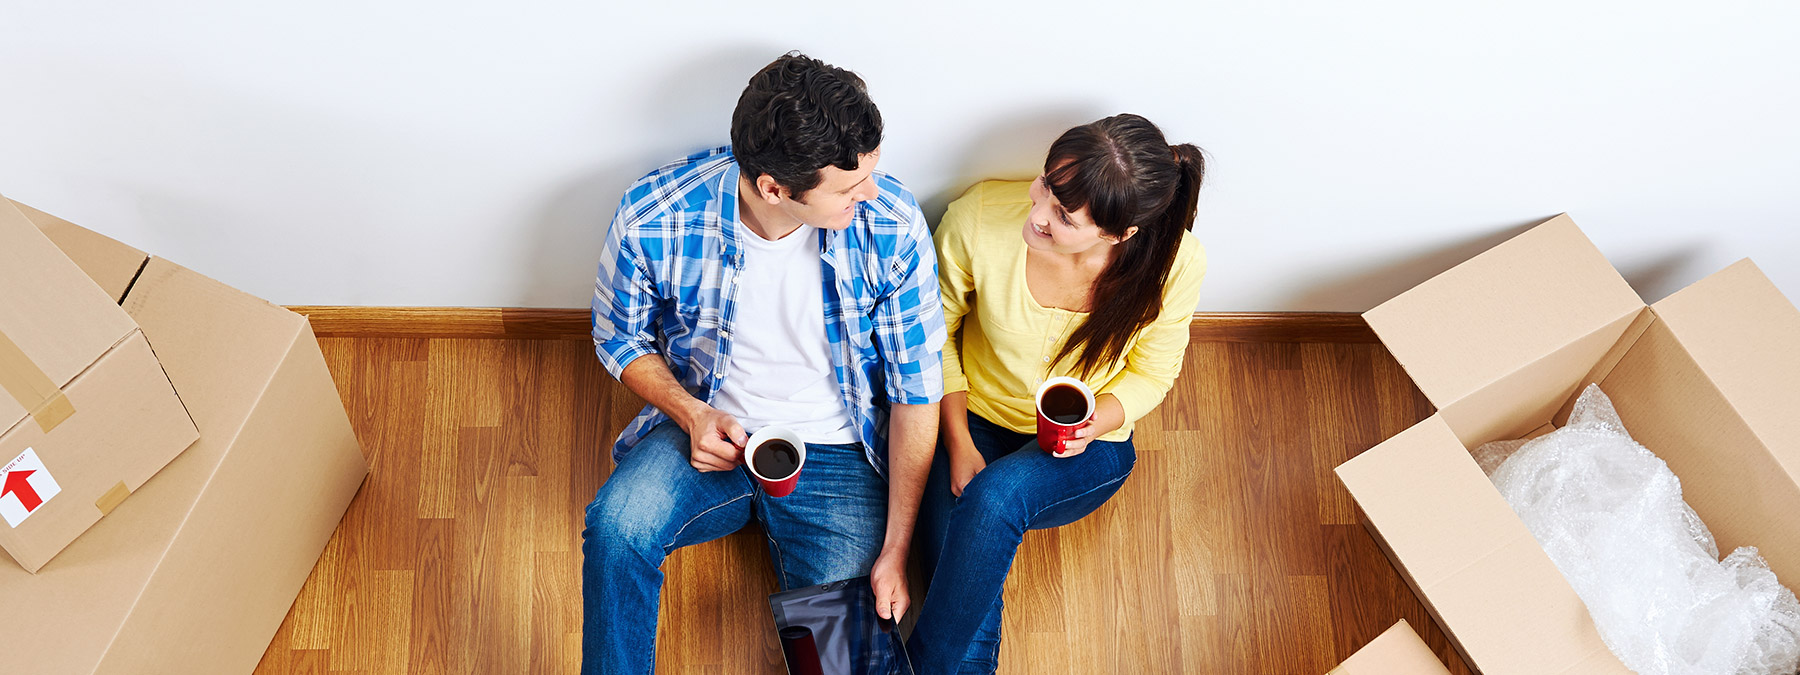 A young couple shares a cup of coffee on the floor of their new home